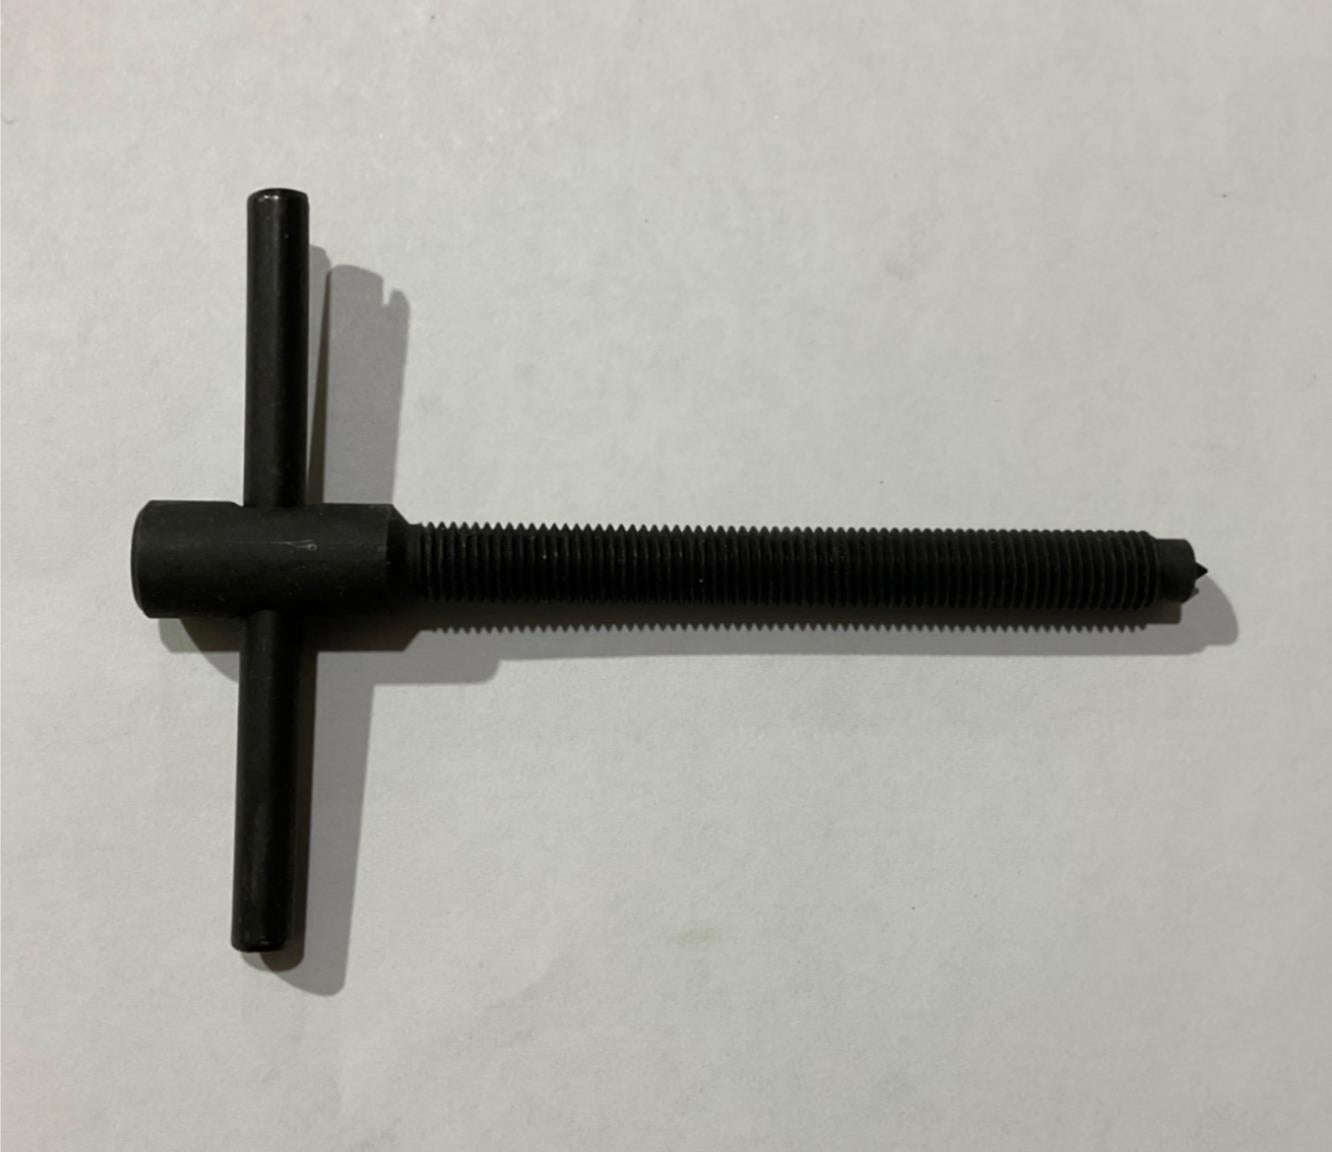 OEM 207029A Forcing Screw #91